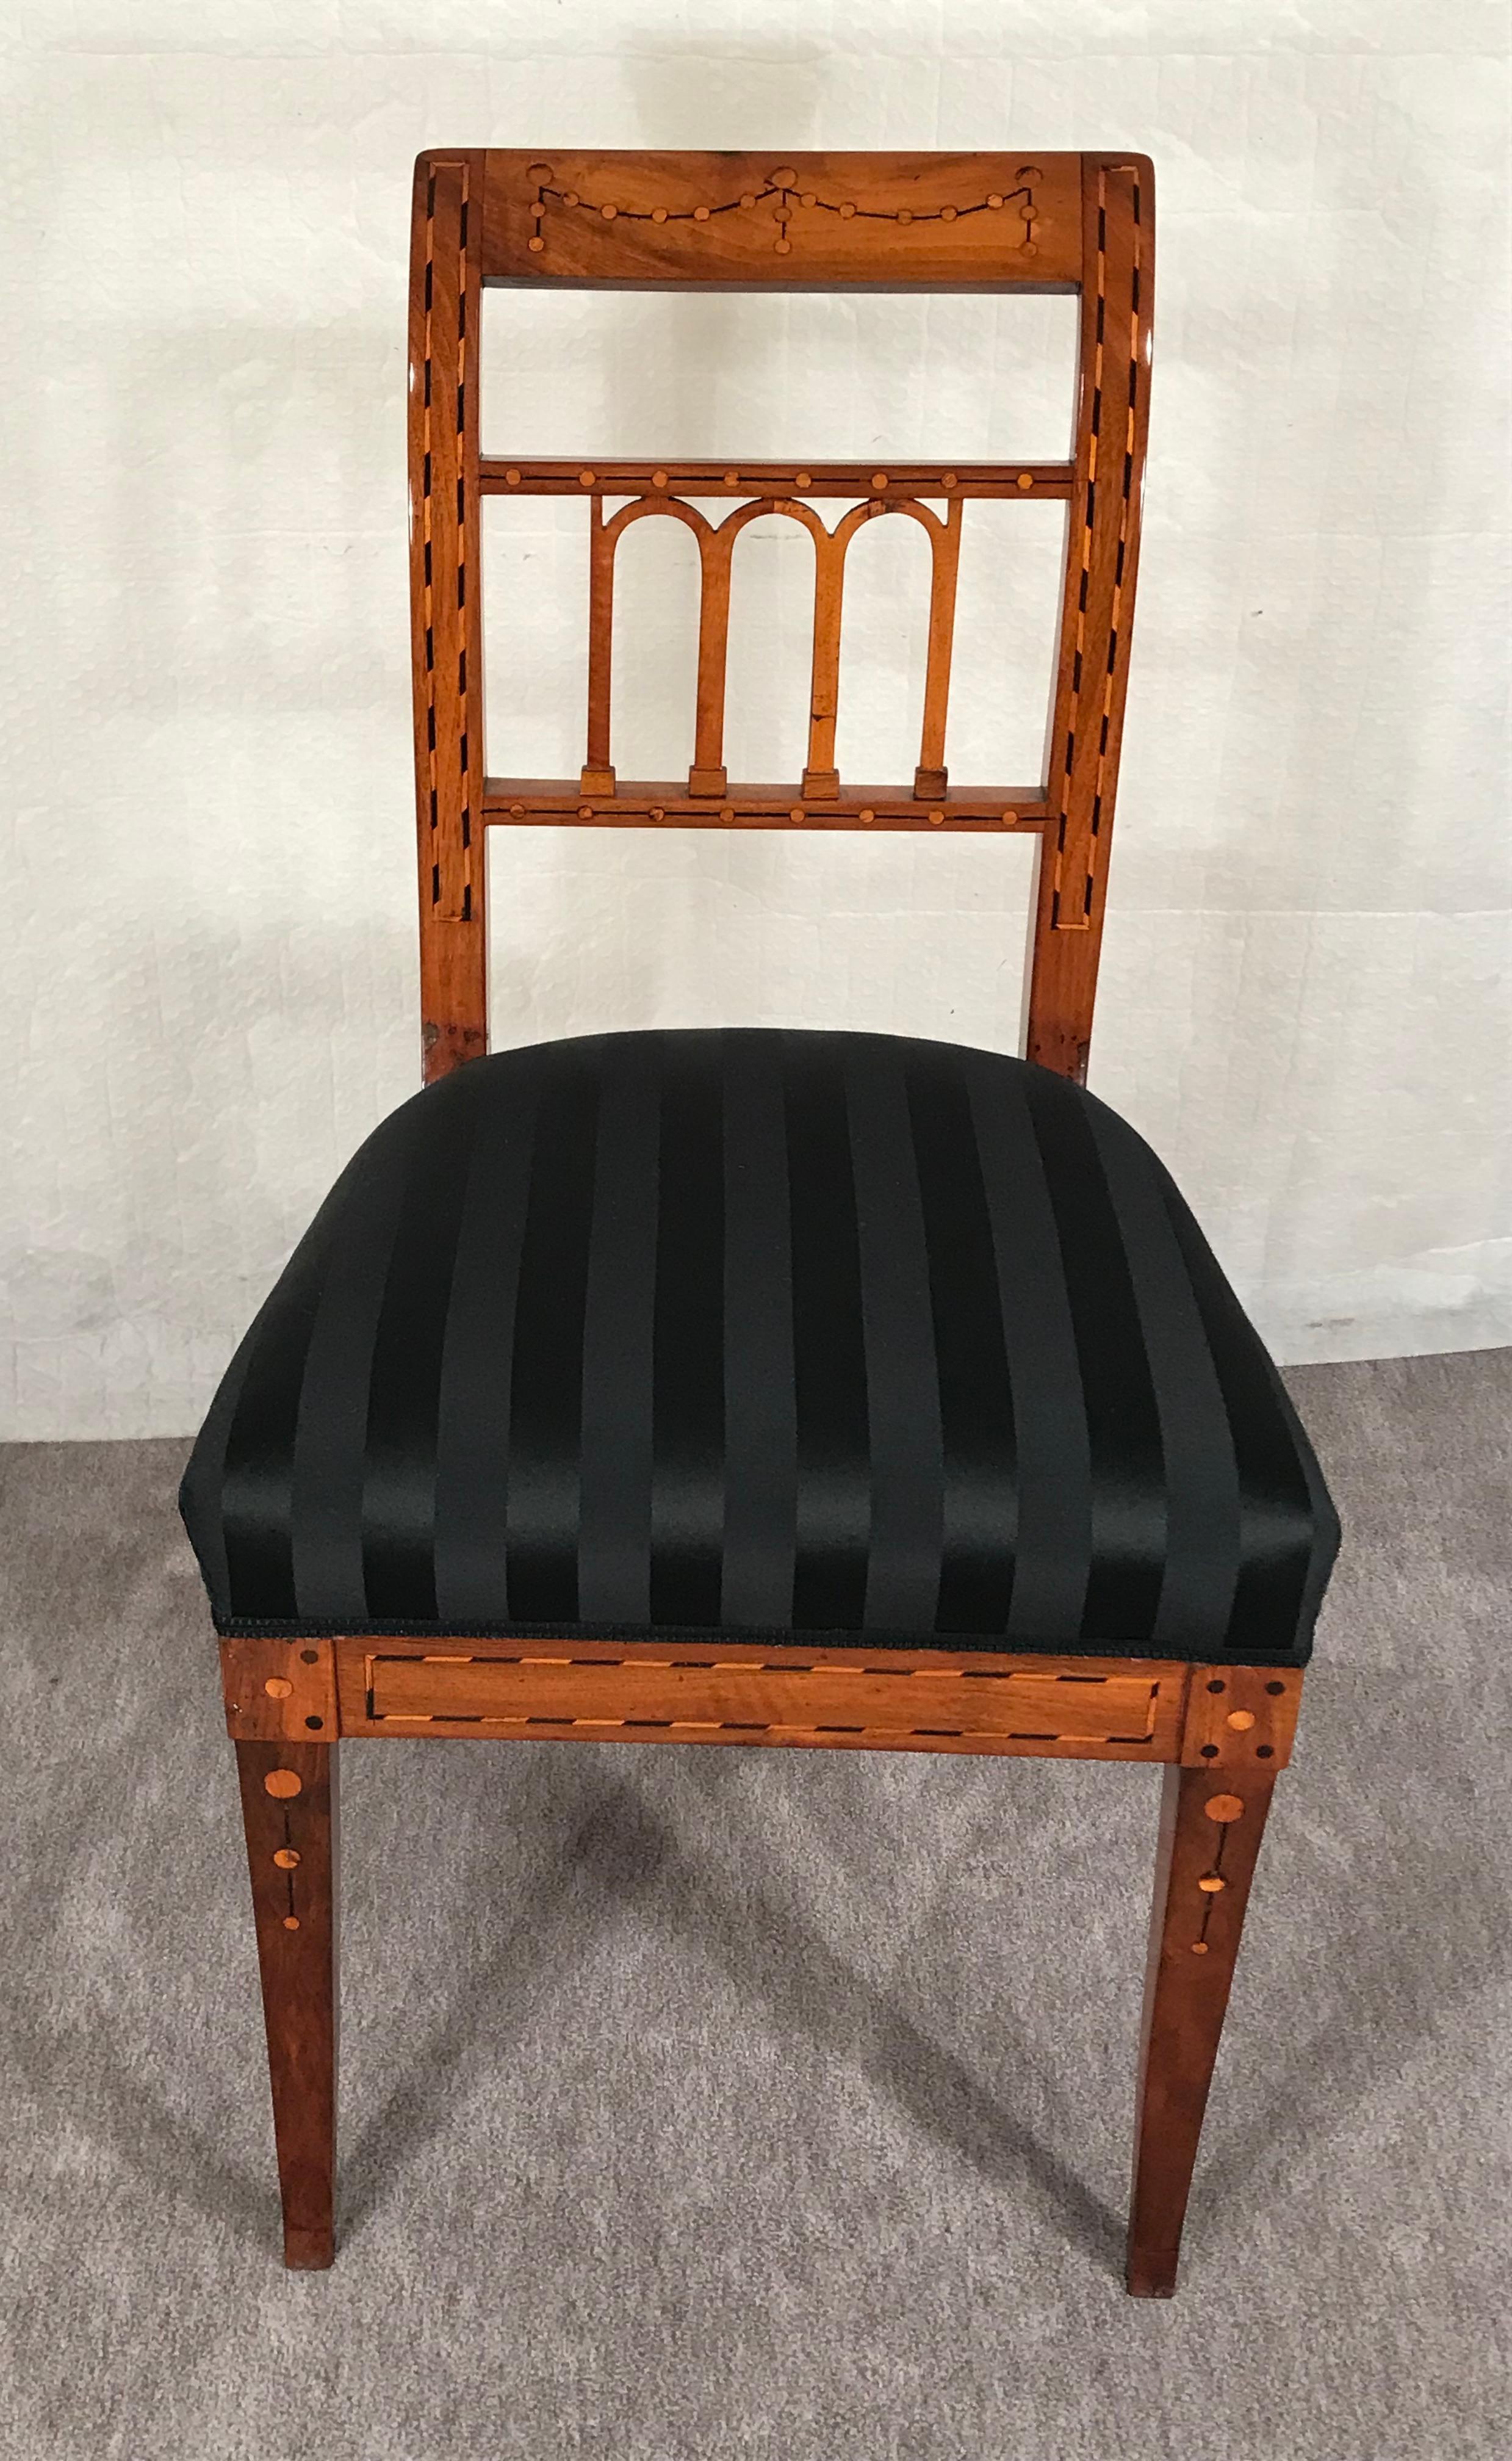 This pair of Louis XVI chairs dates back to around 1800 and comes from the southern part of Germany.
The chairs have a walnut veneer and very pretty inlays in yew wood. The backrests feature an elegant neoclassical design. The chairs come refinished